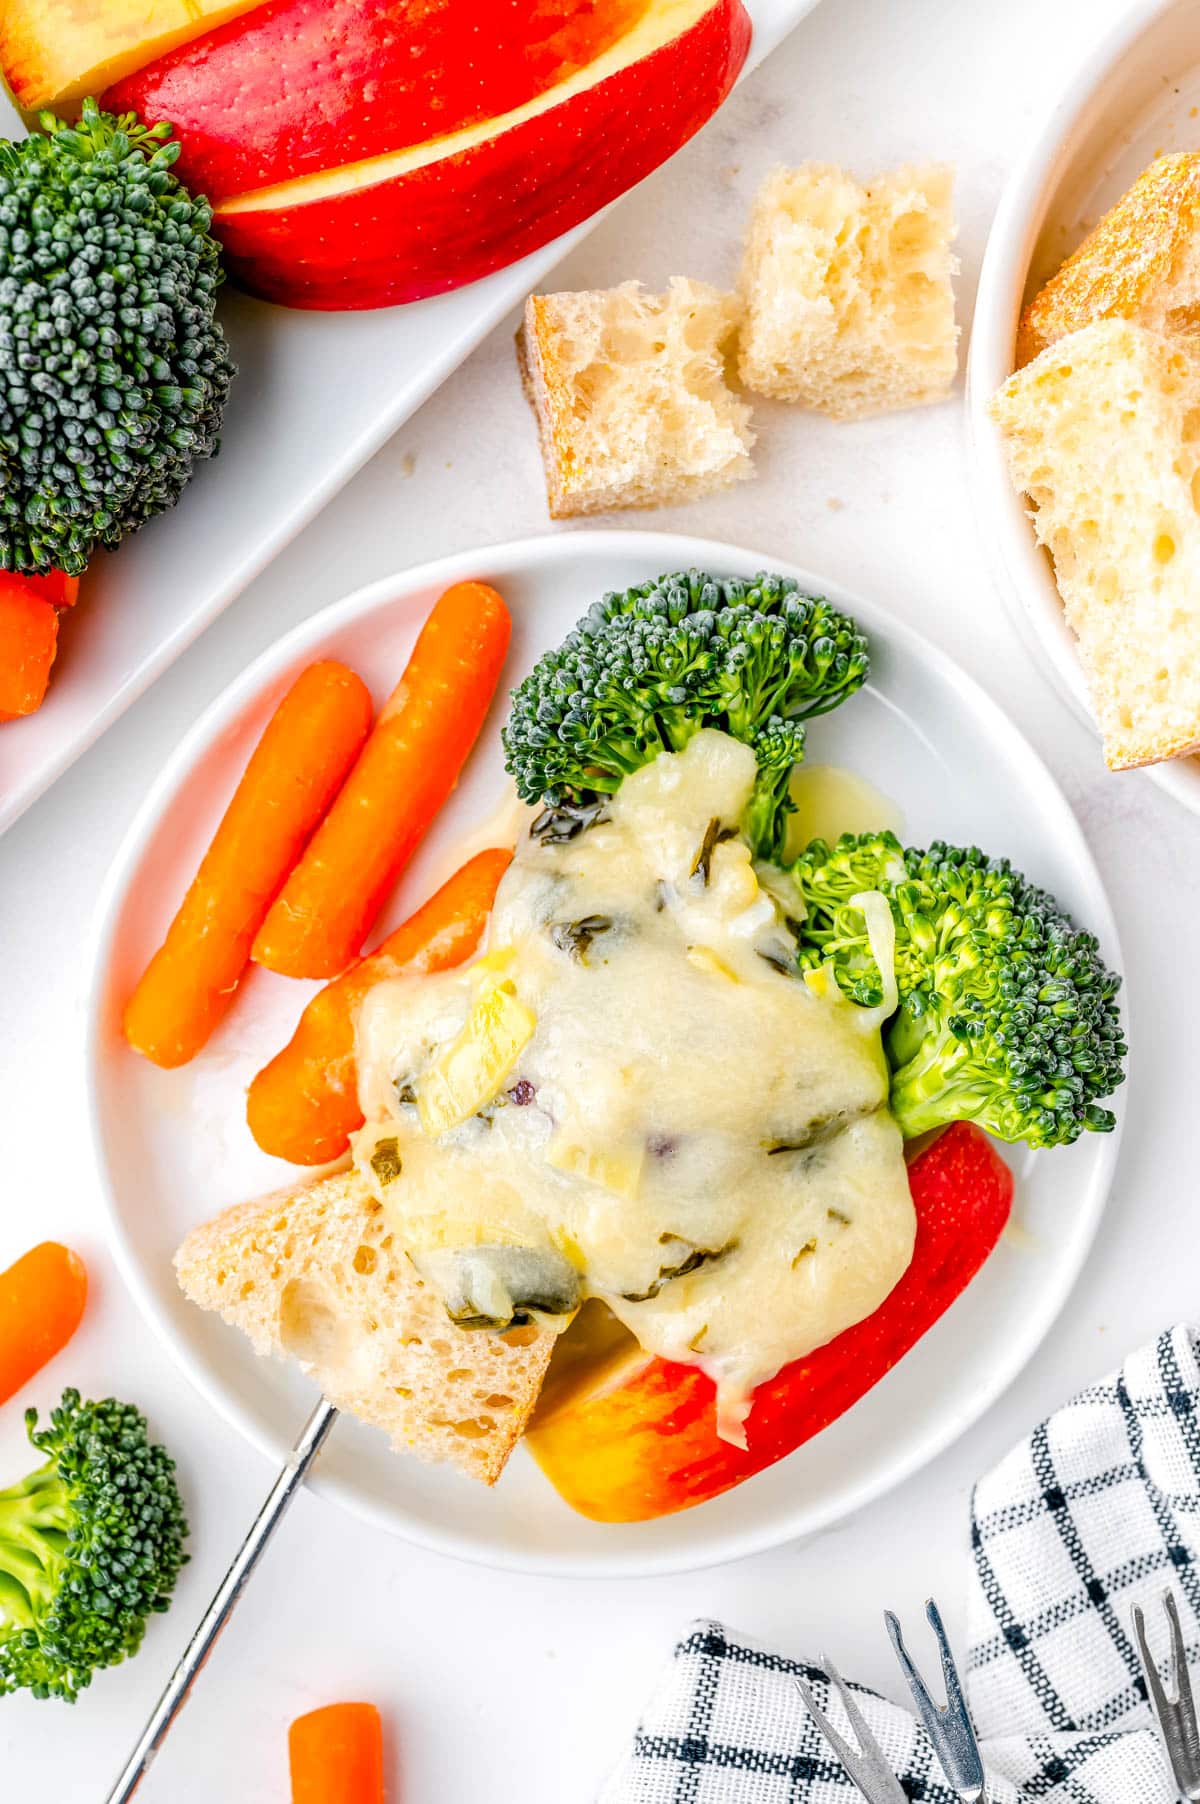 Cheese fondue spread over some vegetables.